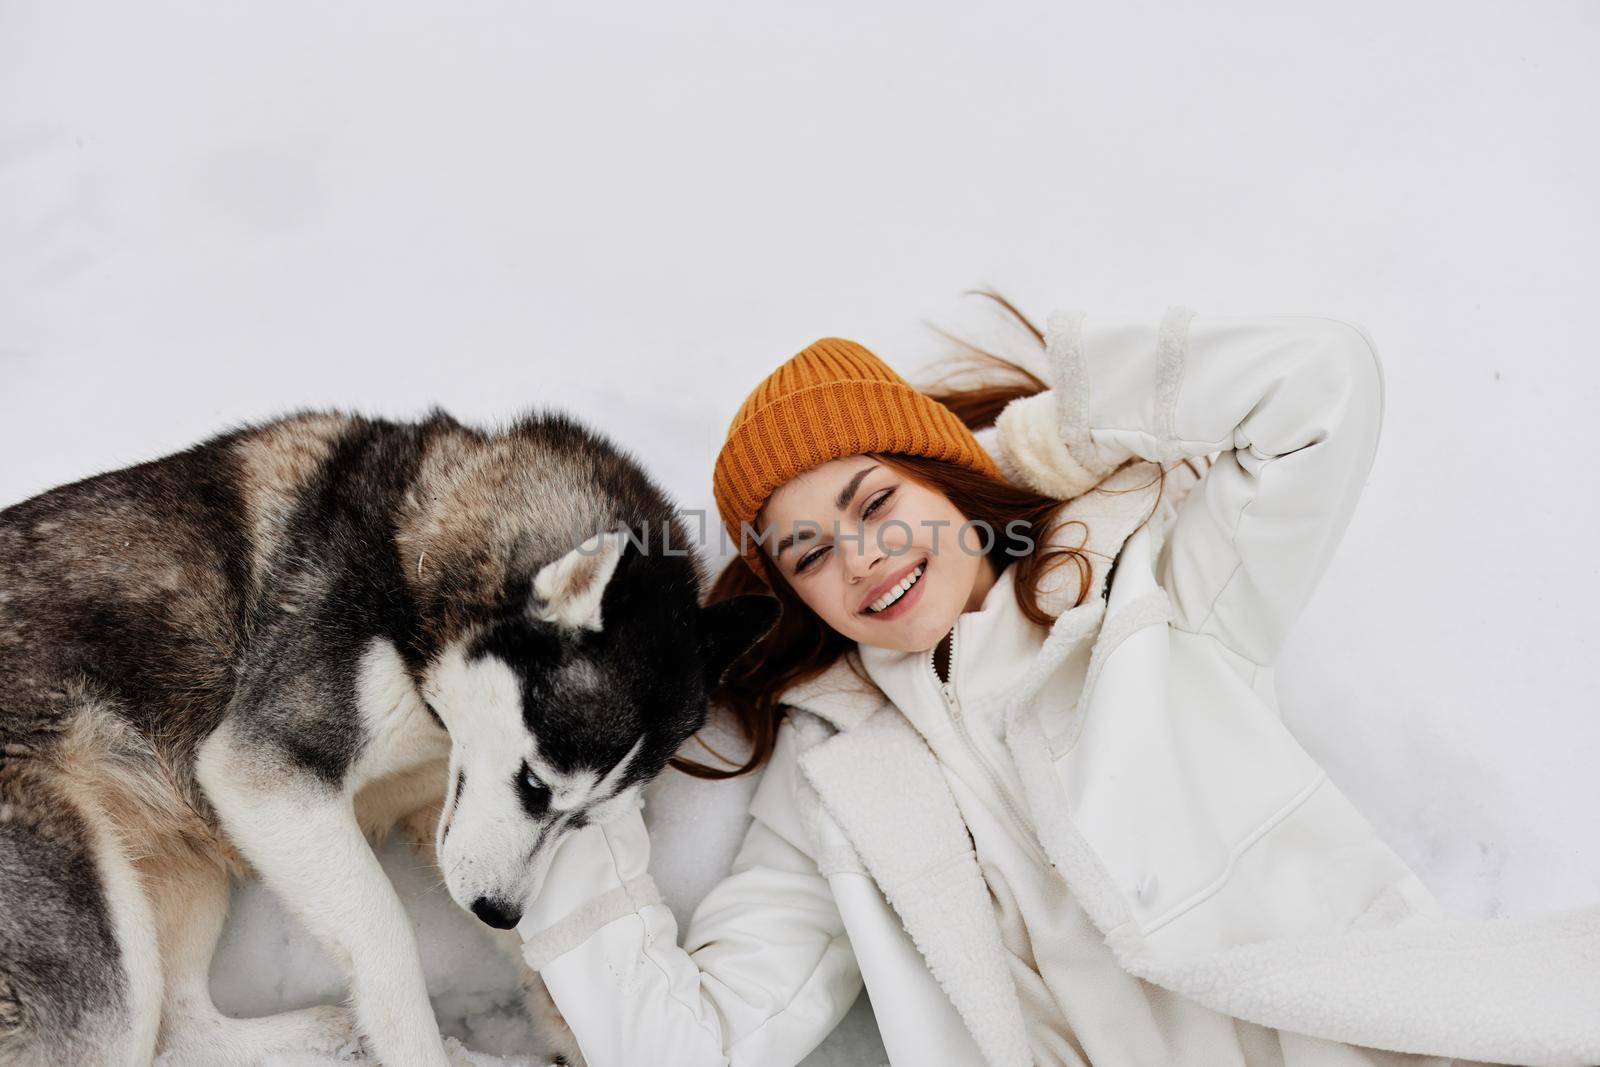 cheerful woman in the snow playing with a dog fun friendship Lifestyle. High quality photo